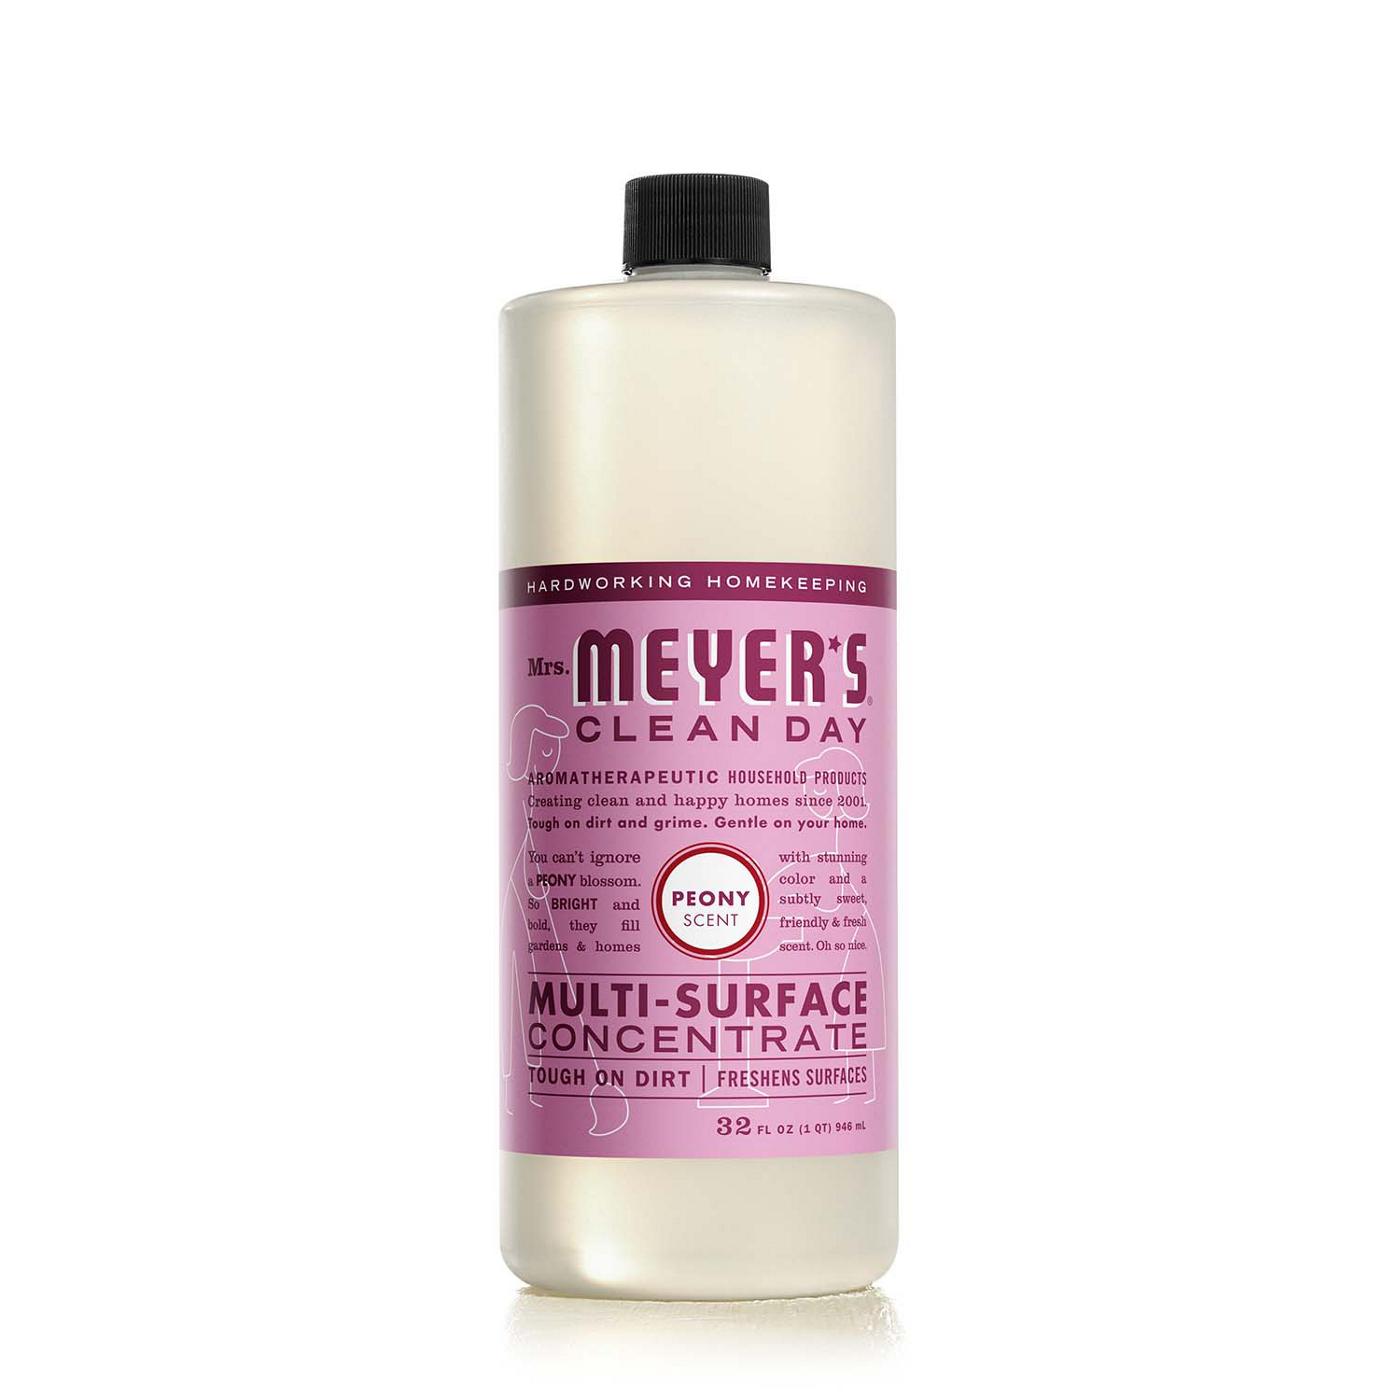 Mrs. Meyer's Clean Day Peony Scent All Purpose Cleaner; image 1 of 6